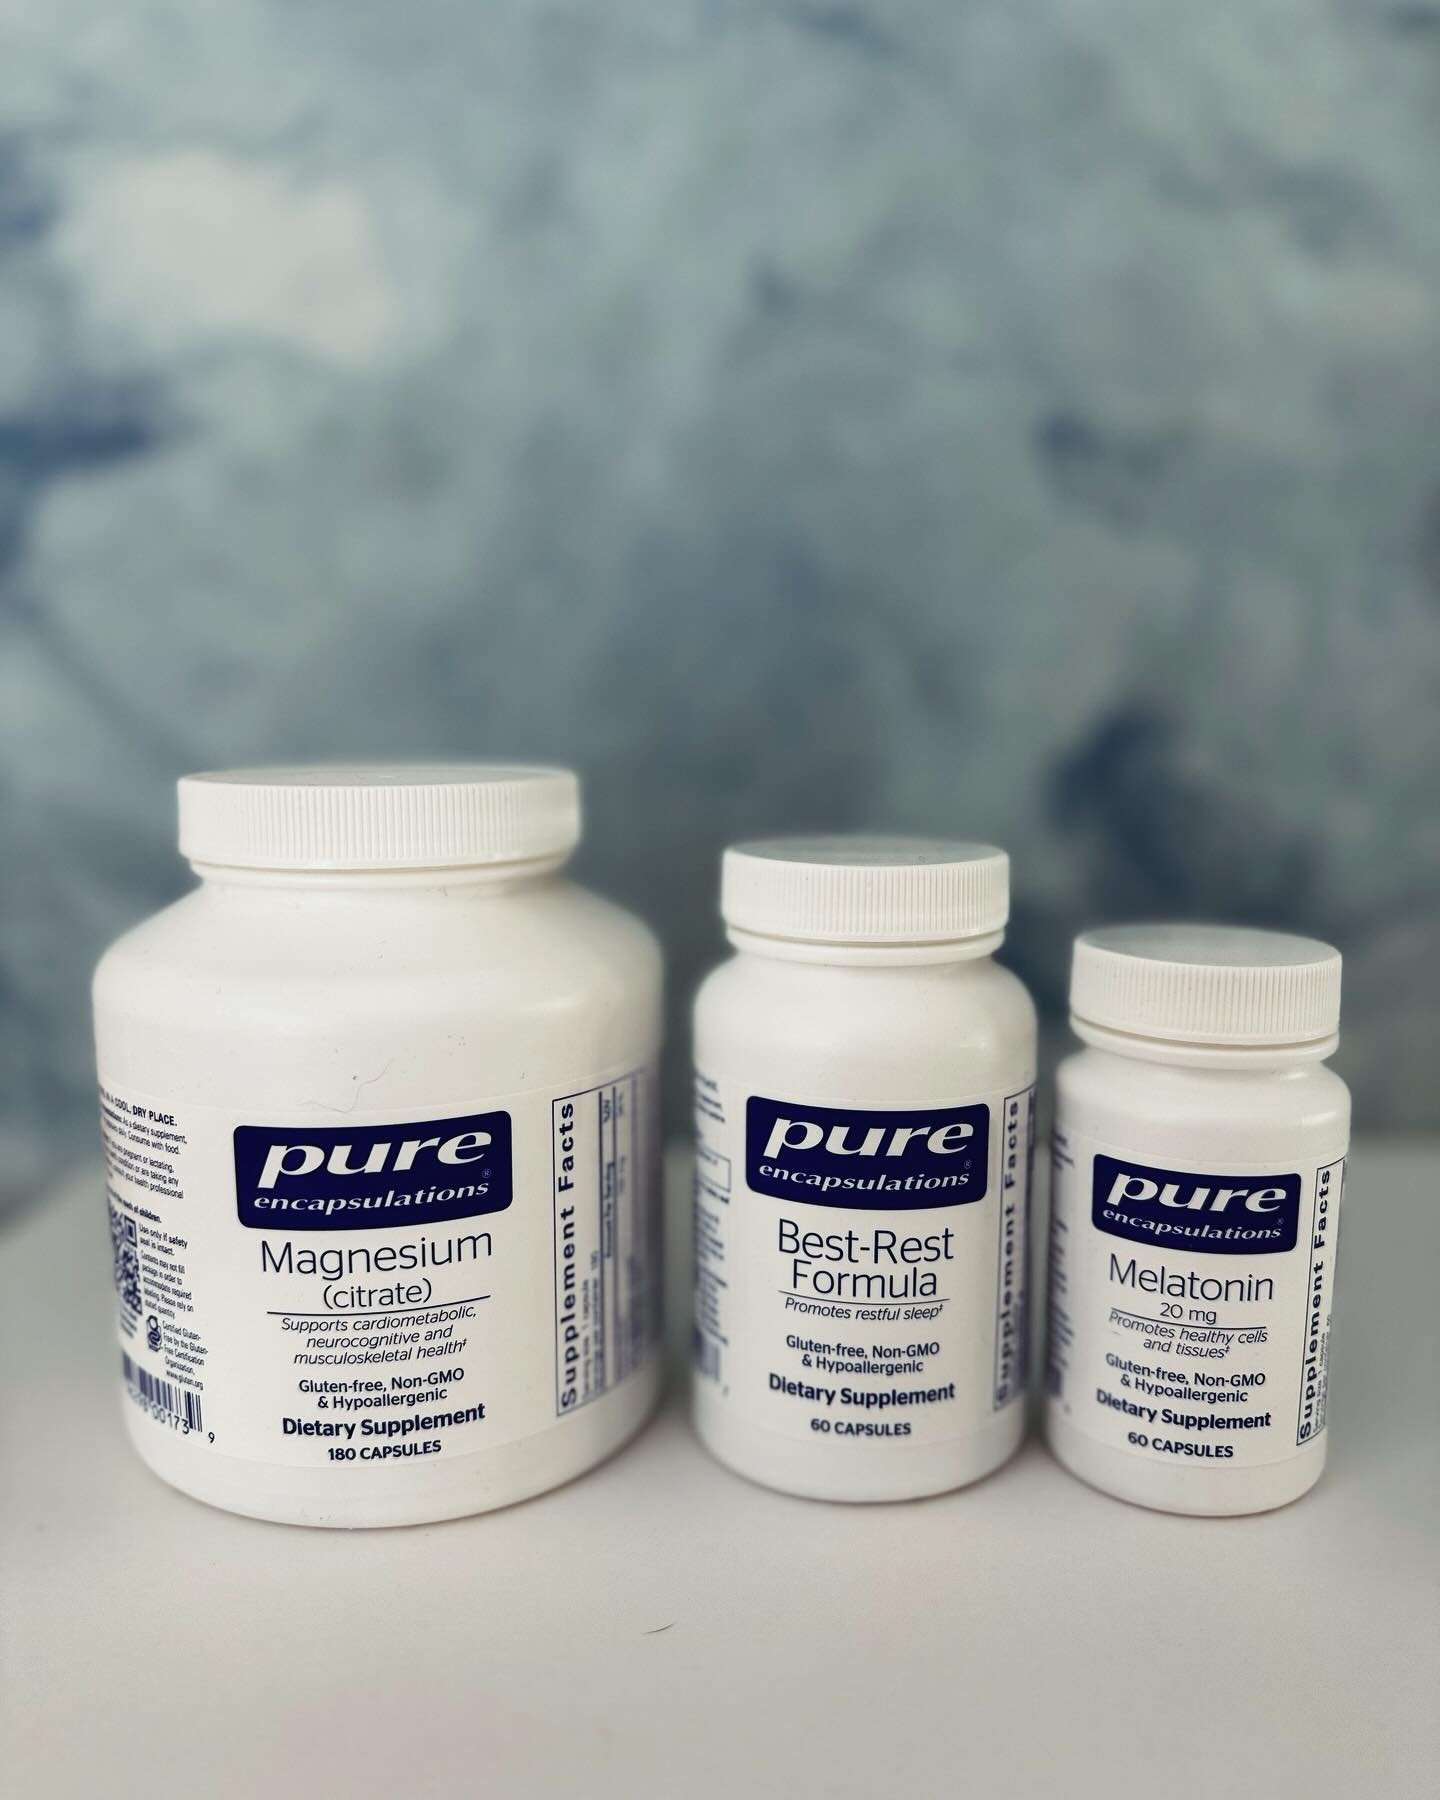 💤 Healthy Sleep with Supplements &amp;  sound of the ocean #whitenoise. 💤
➡️Magnesium, Best-Rest Formula &amp; Melatonin

Pure Encapsulations are FREE from GMO, Gluten &amp; are Vegan. 
Stop in we would love to share this High-quality supplements t